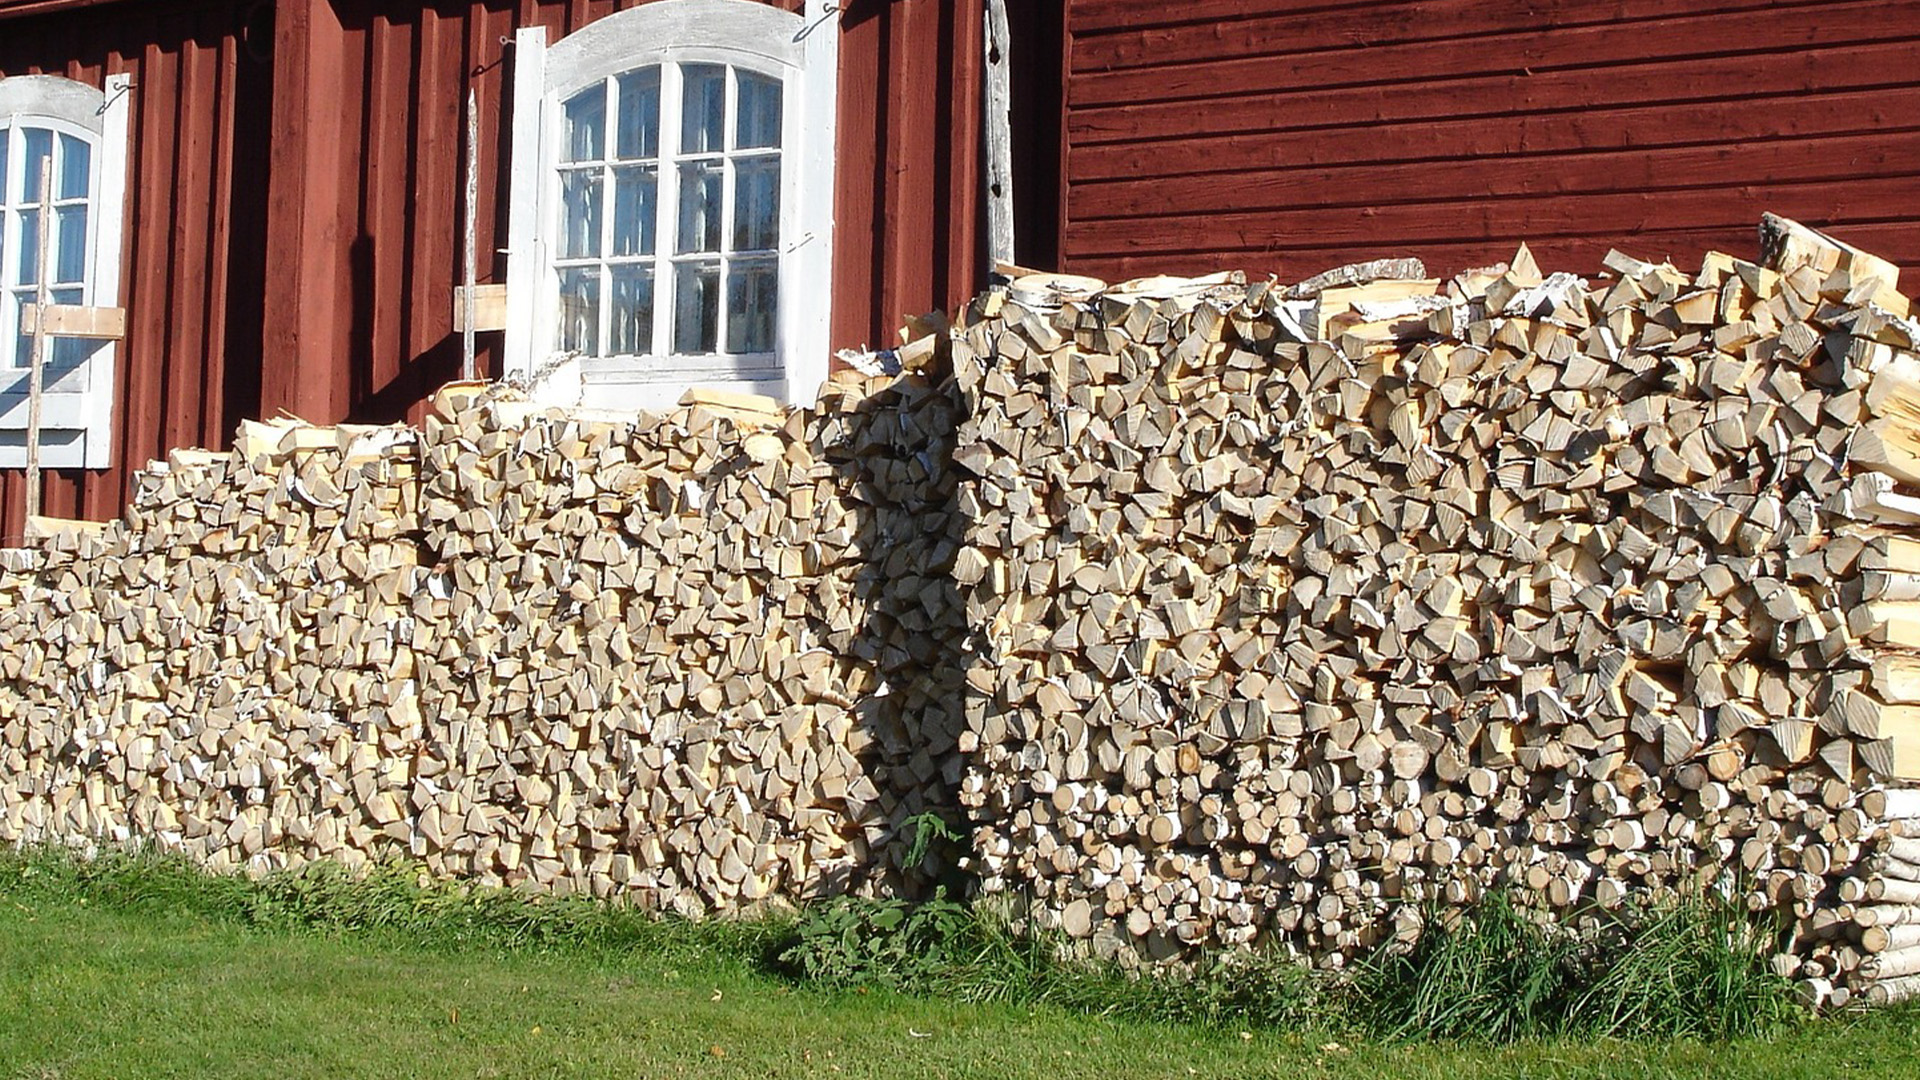 Two large wood piles stacked against the exterior of a home